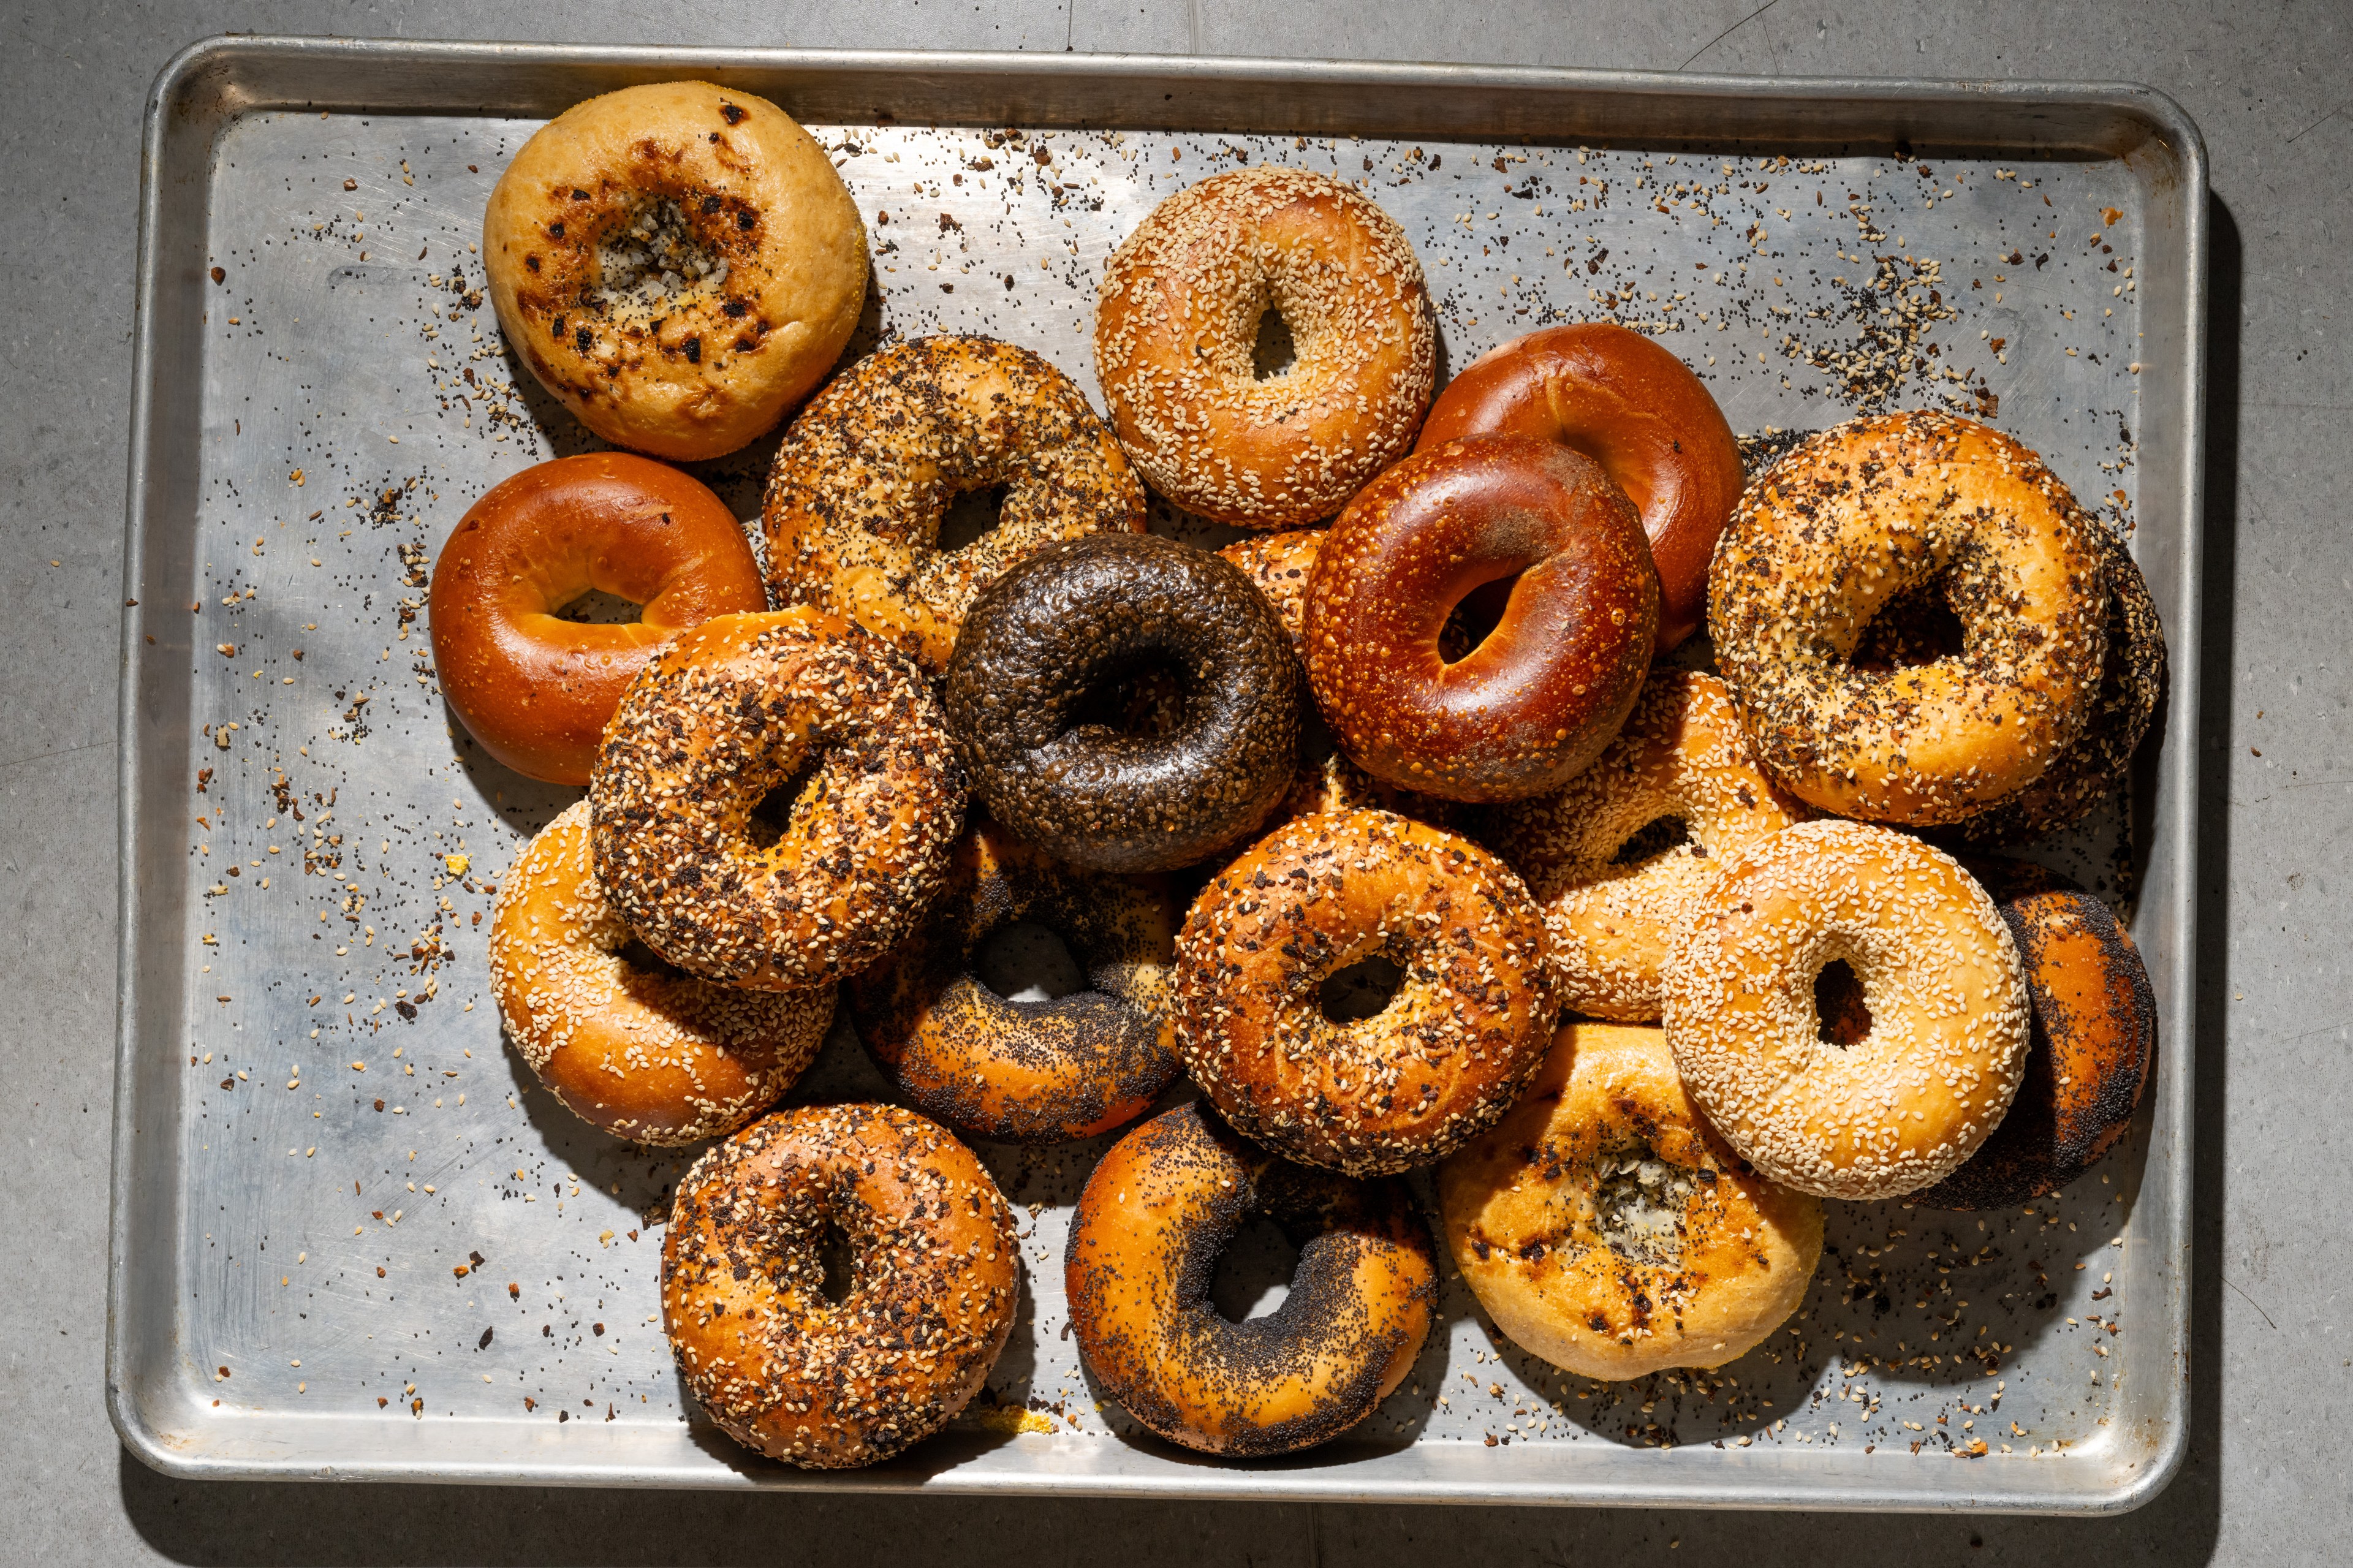 A metal tray holds a variety of bagels, some plain, some with sesame seeds, and others coated in everything seasoning. The bagels are casually arranged.